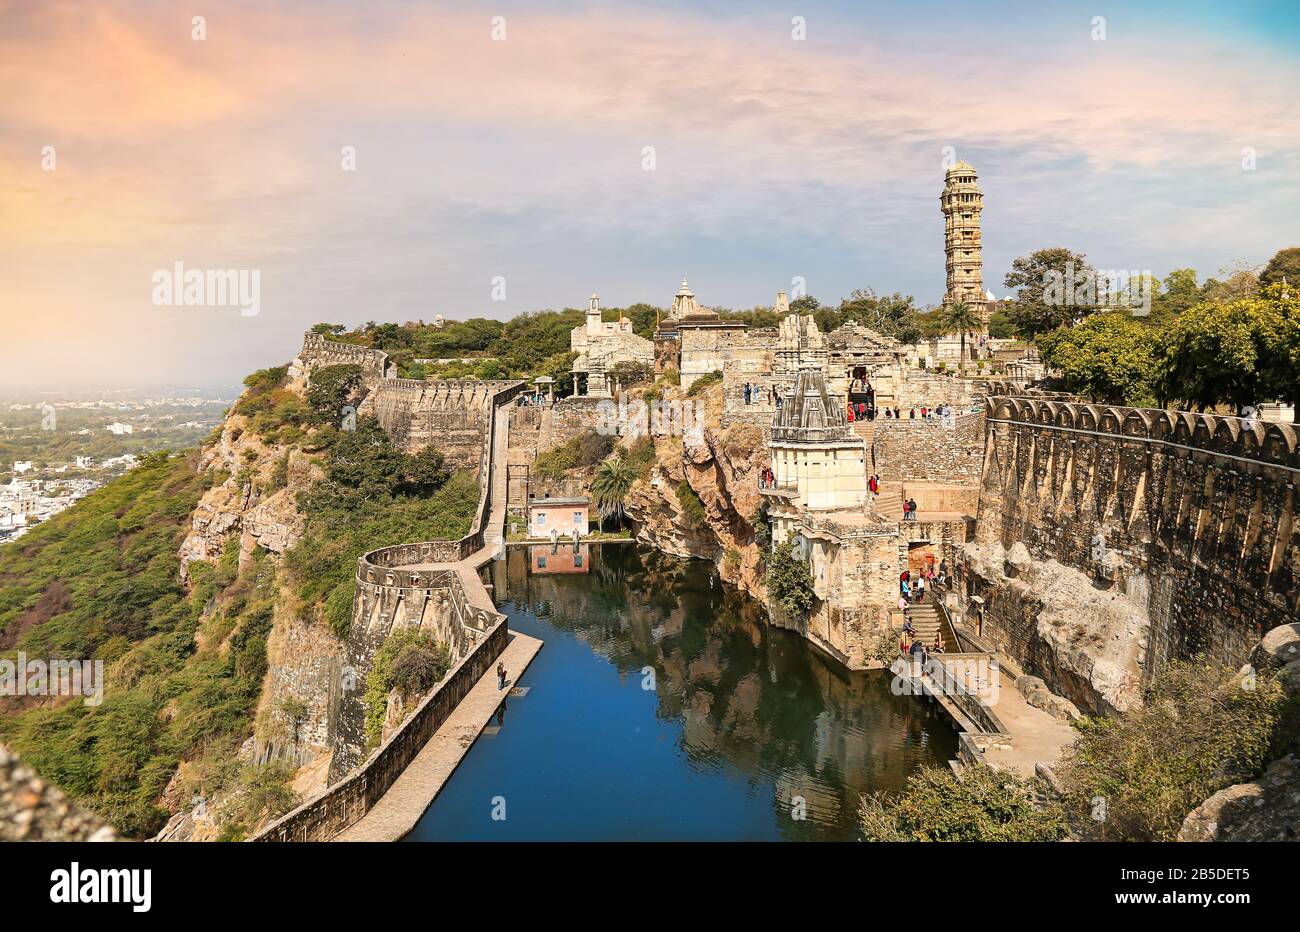 Historic Fort at Chittorgarh Rajasthan is a UNESCO World Heritage site and one of the largest forts in India Stock Photo